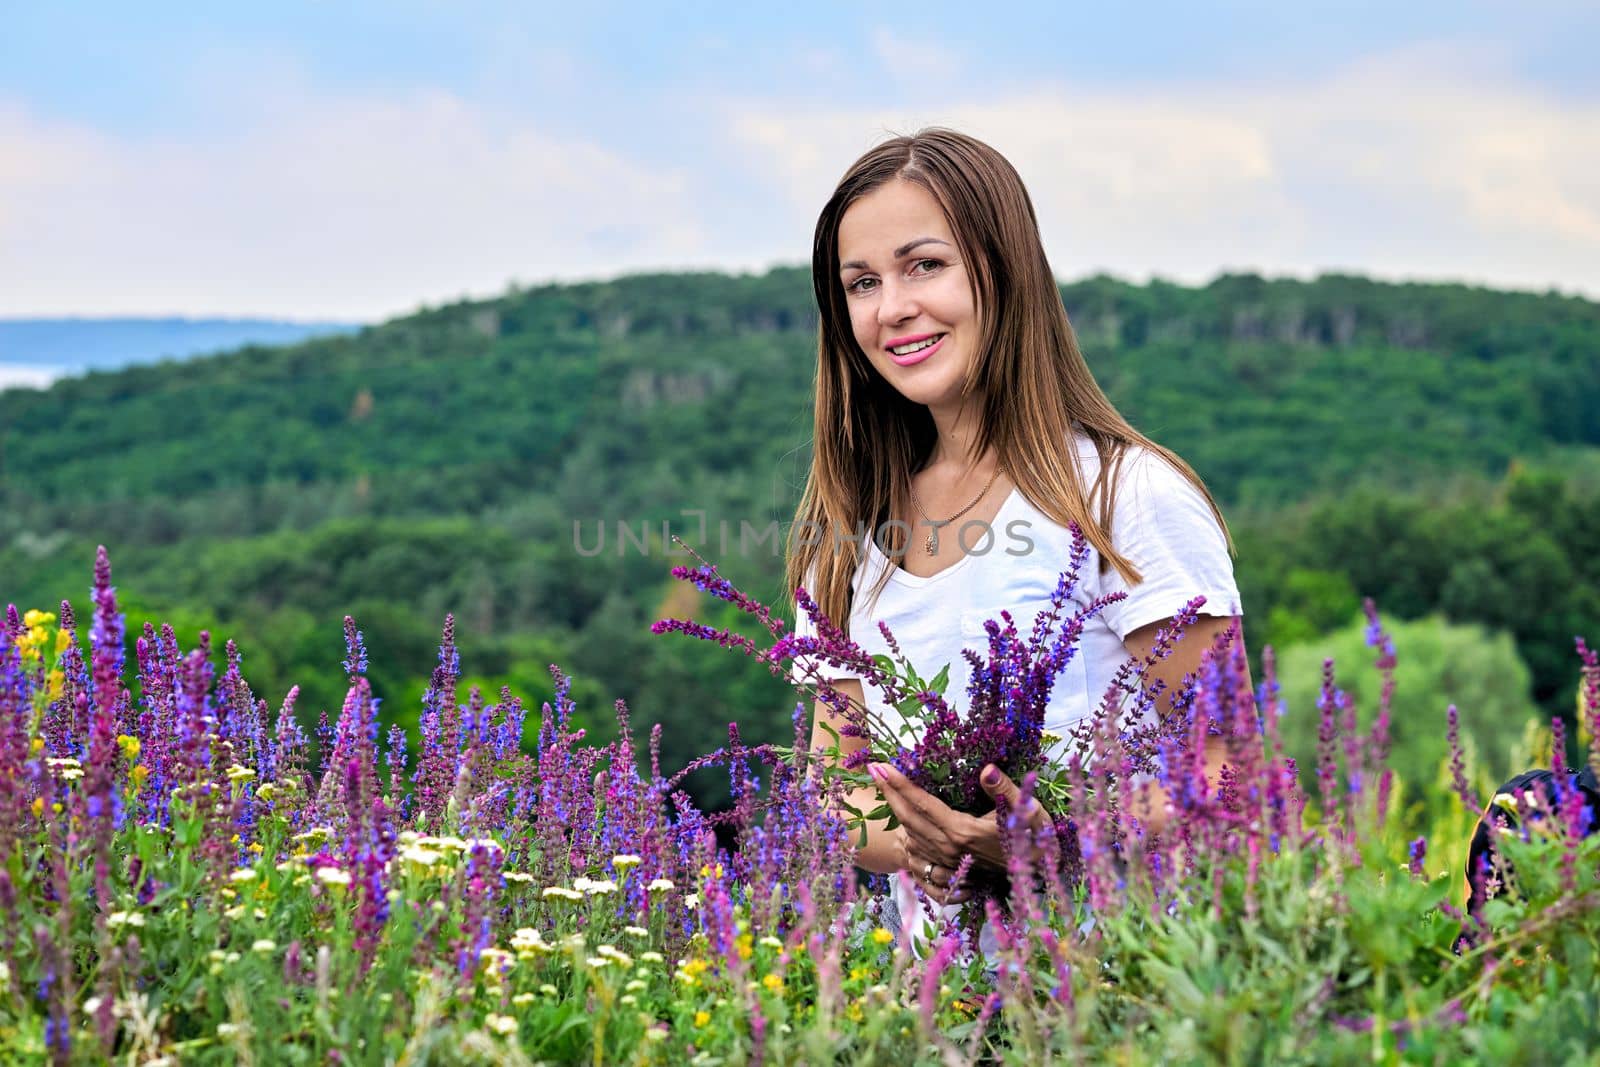 any plant with leaves, seeds, or flowers used for flavoring, food, medicine, or perfume. Pretty young woman picking a bouquet of medic herbs. Lilac flowers and greenery.